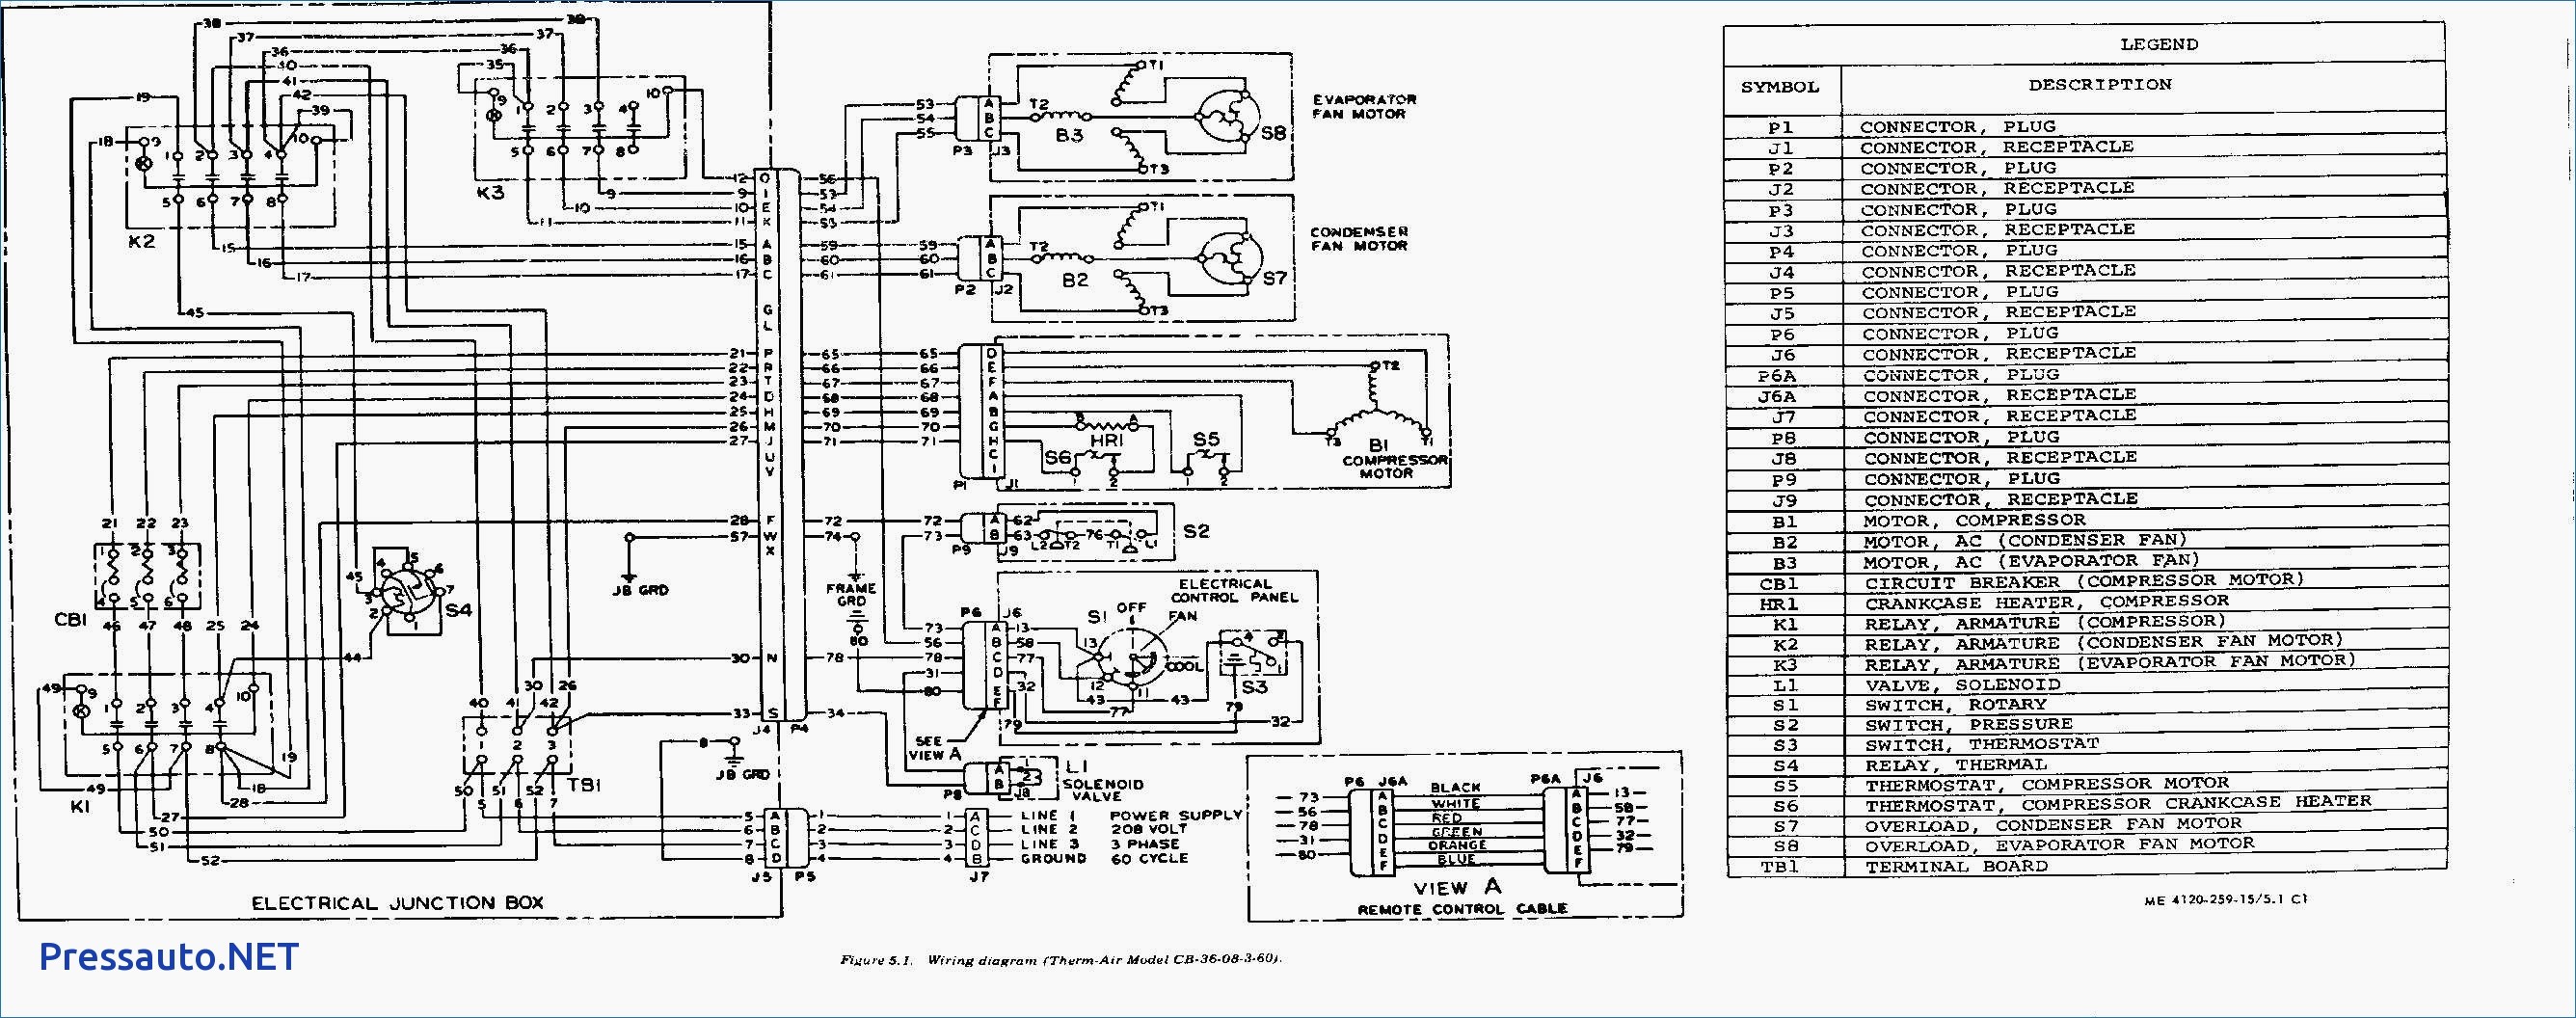 Wiring Diagram for Trane Air Conditioner Free Downloads Trane Air Conditioner Wiring Diagram 5a F with